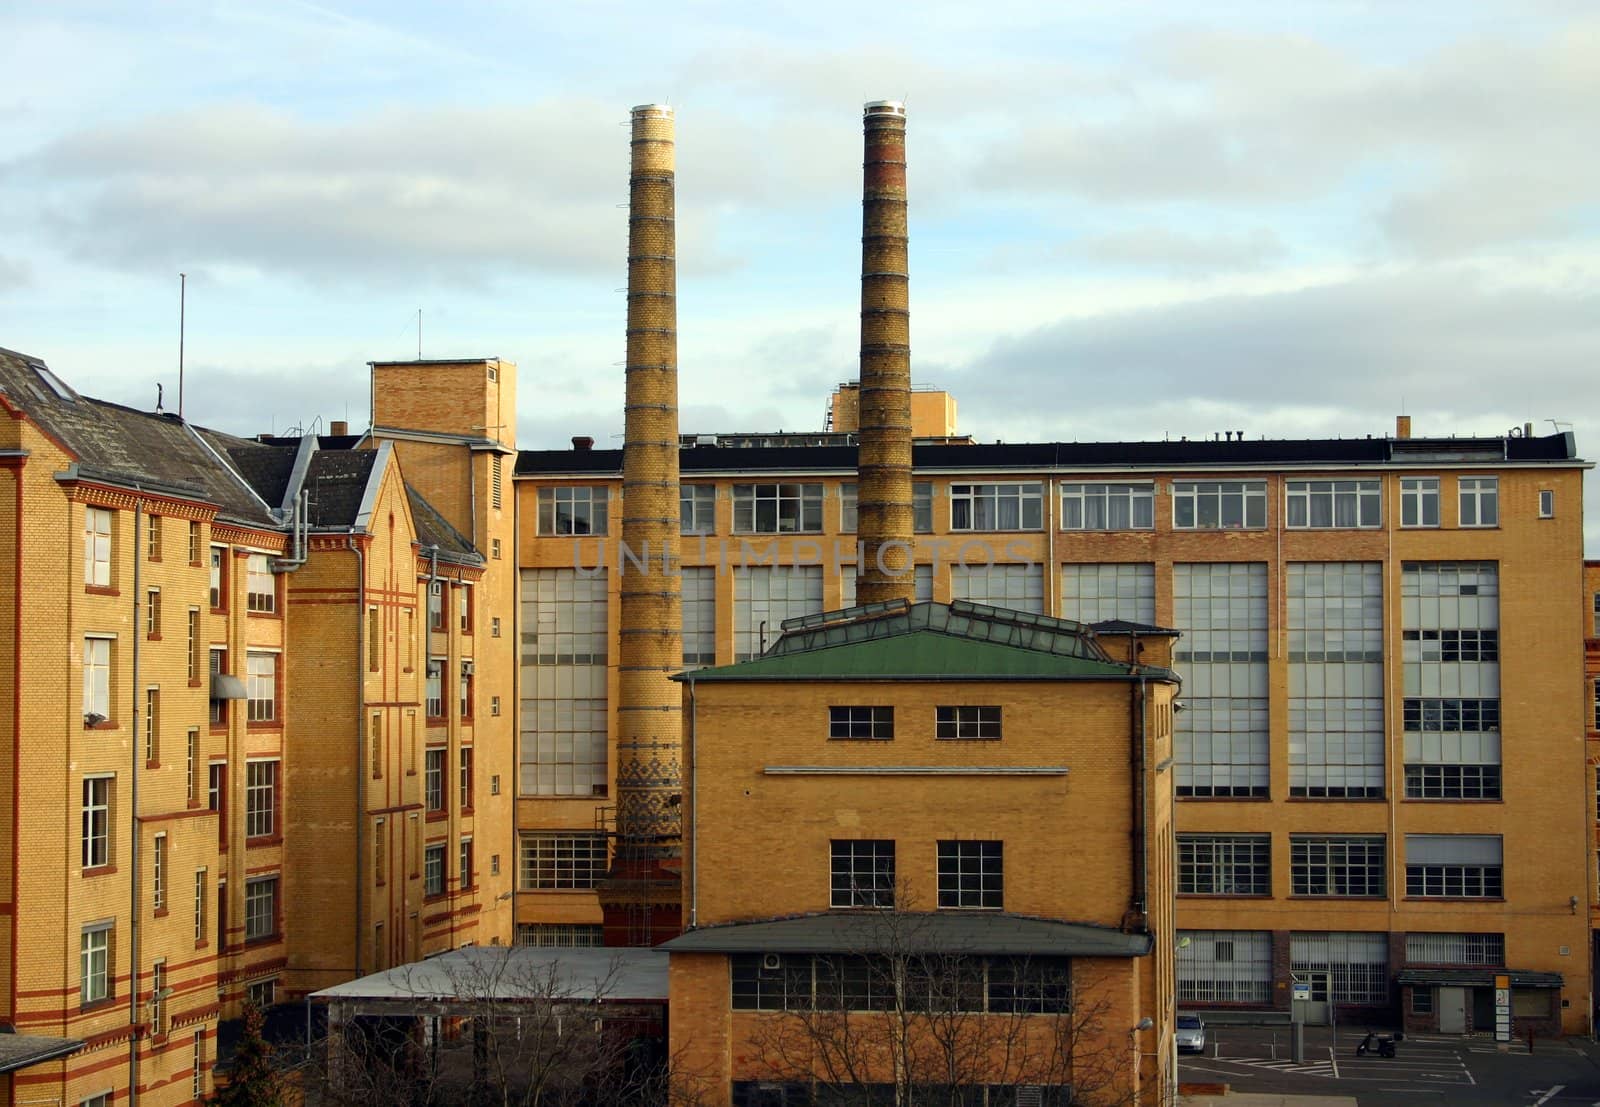 Factory, structure, architecture, design from a brick